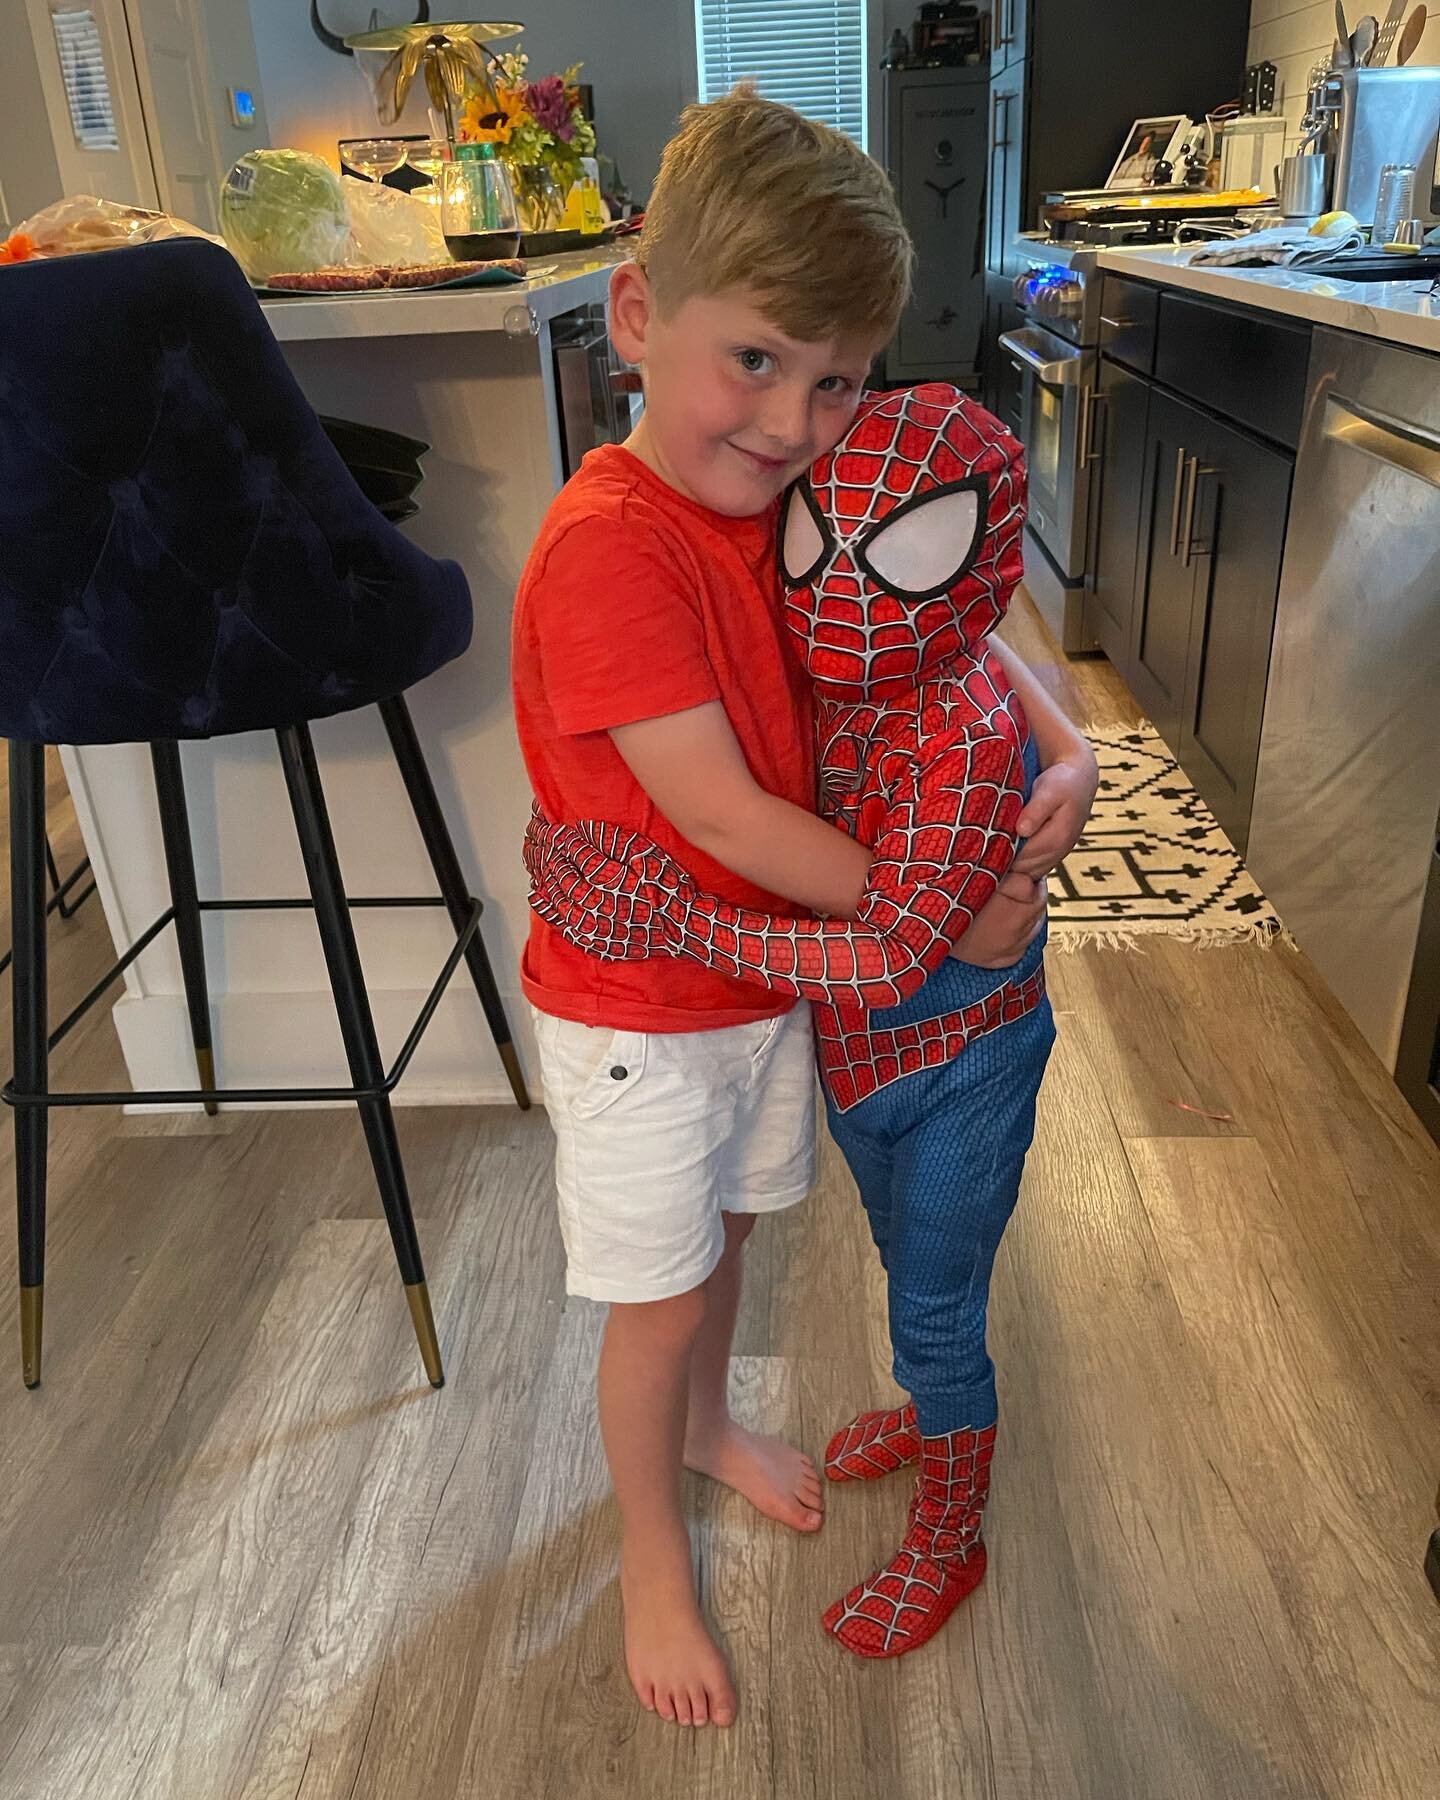 I&rsquo;d say the birthday boy had a successful week of celebrations. Good night and lots of love from our tiny Spider-Man #thankyou #spiderman #johnniebleubyrdalexander #stonebyrdalexander @calexander82 @morganalex05